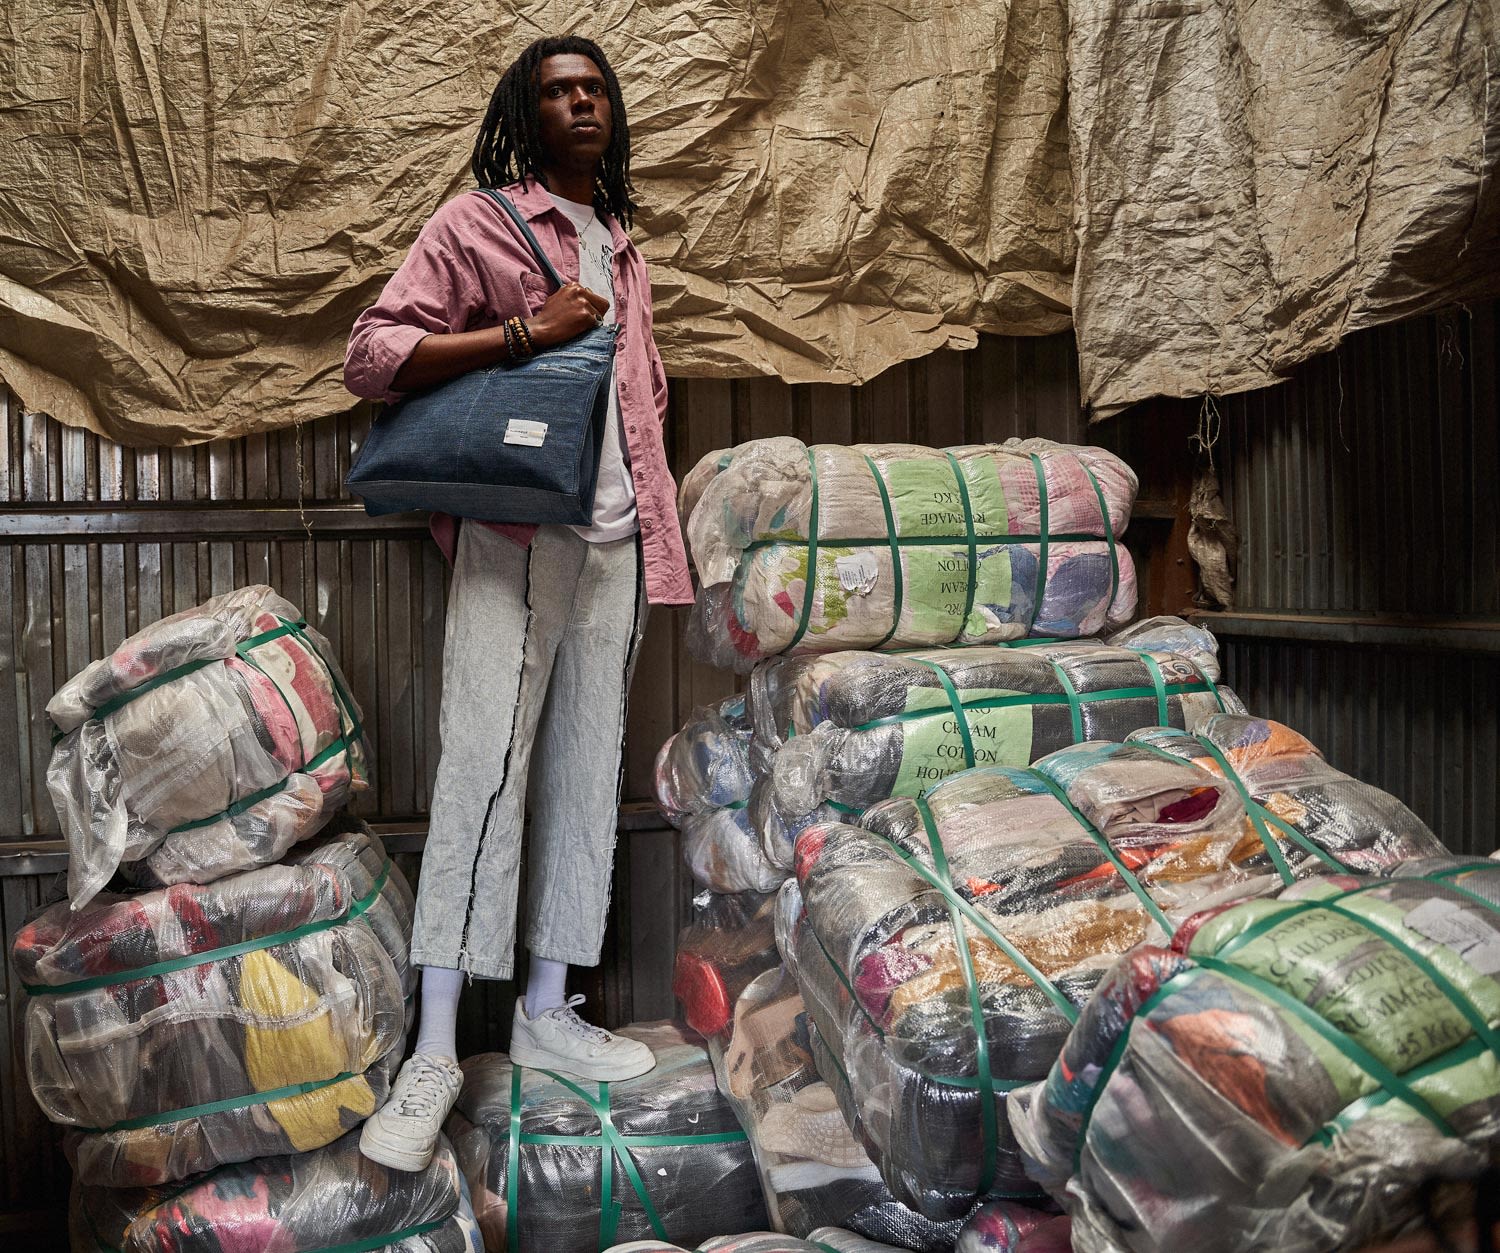 An African man standing with a bag stood next to big packages of reused material